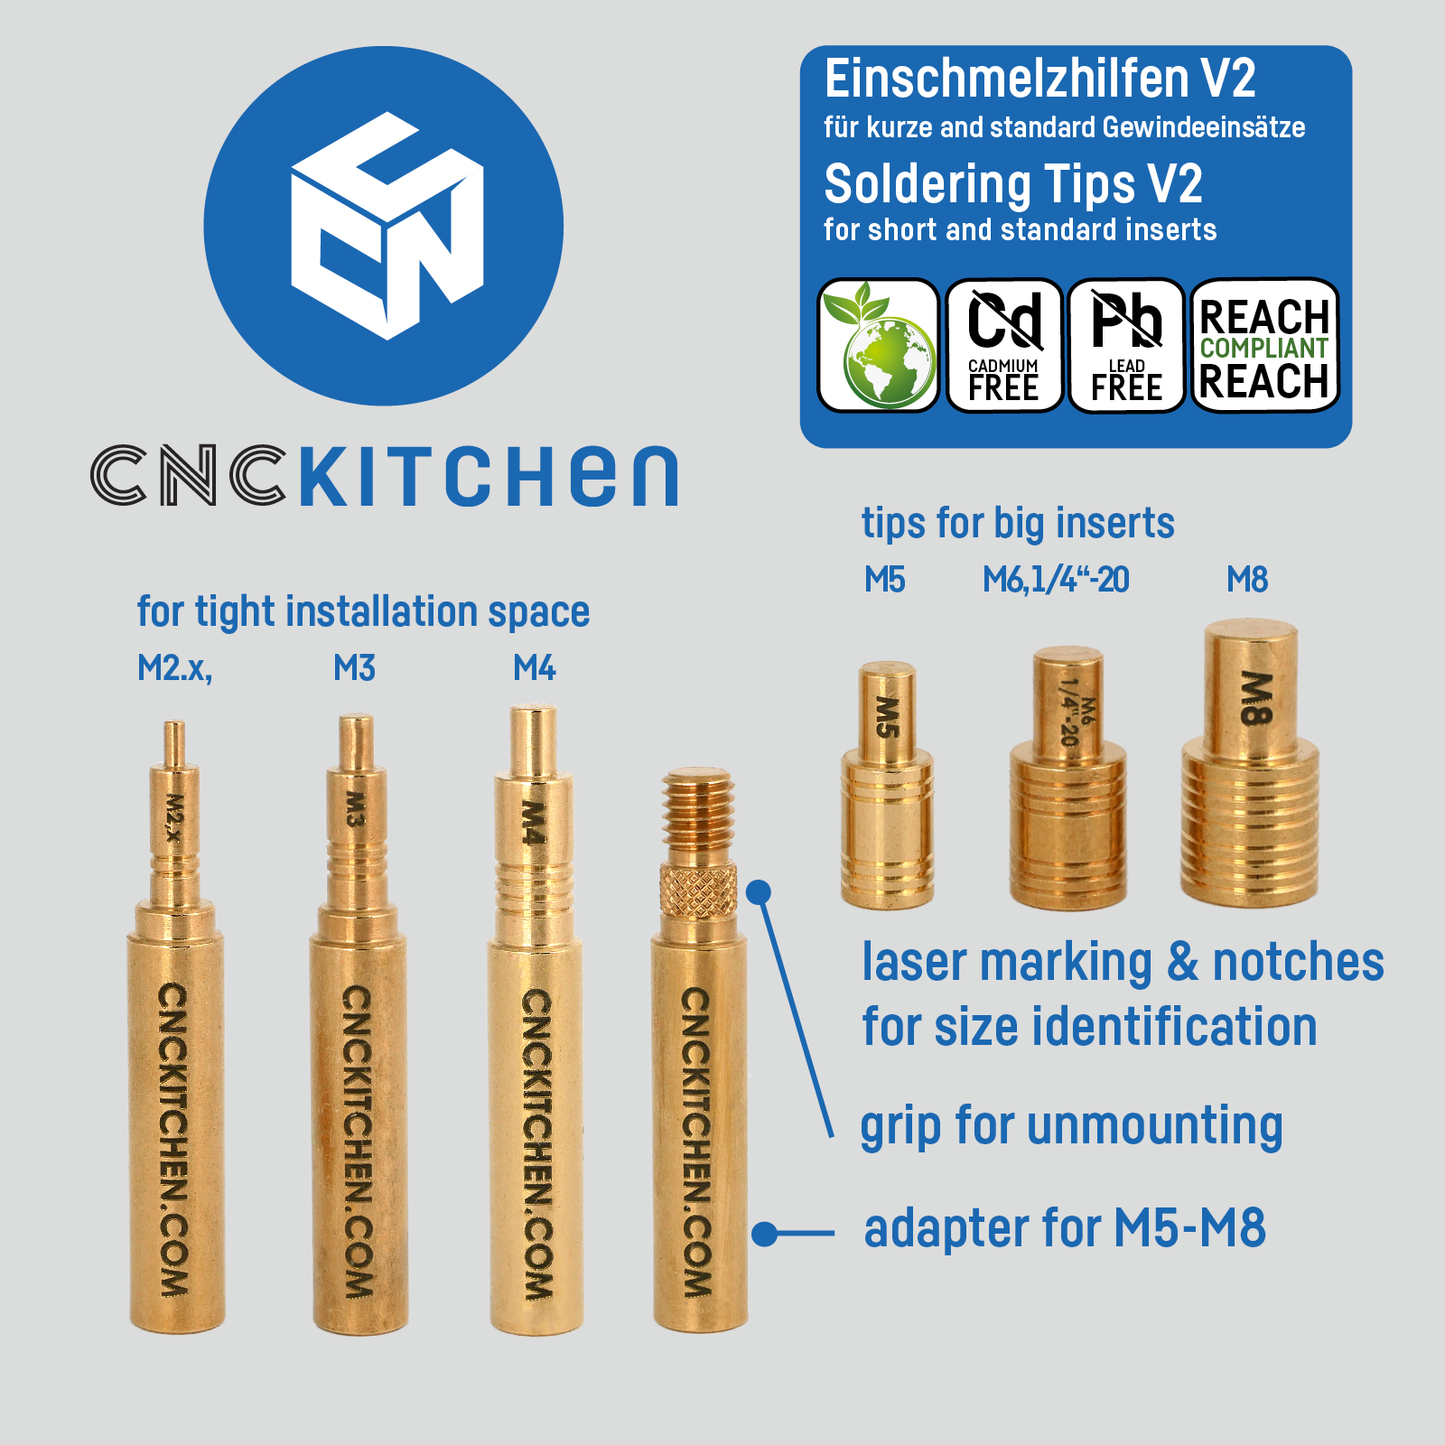 Soldering Tips SET compatible with  900M & T18 (e.g. Hakko)